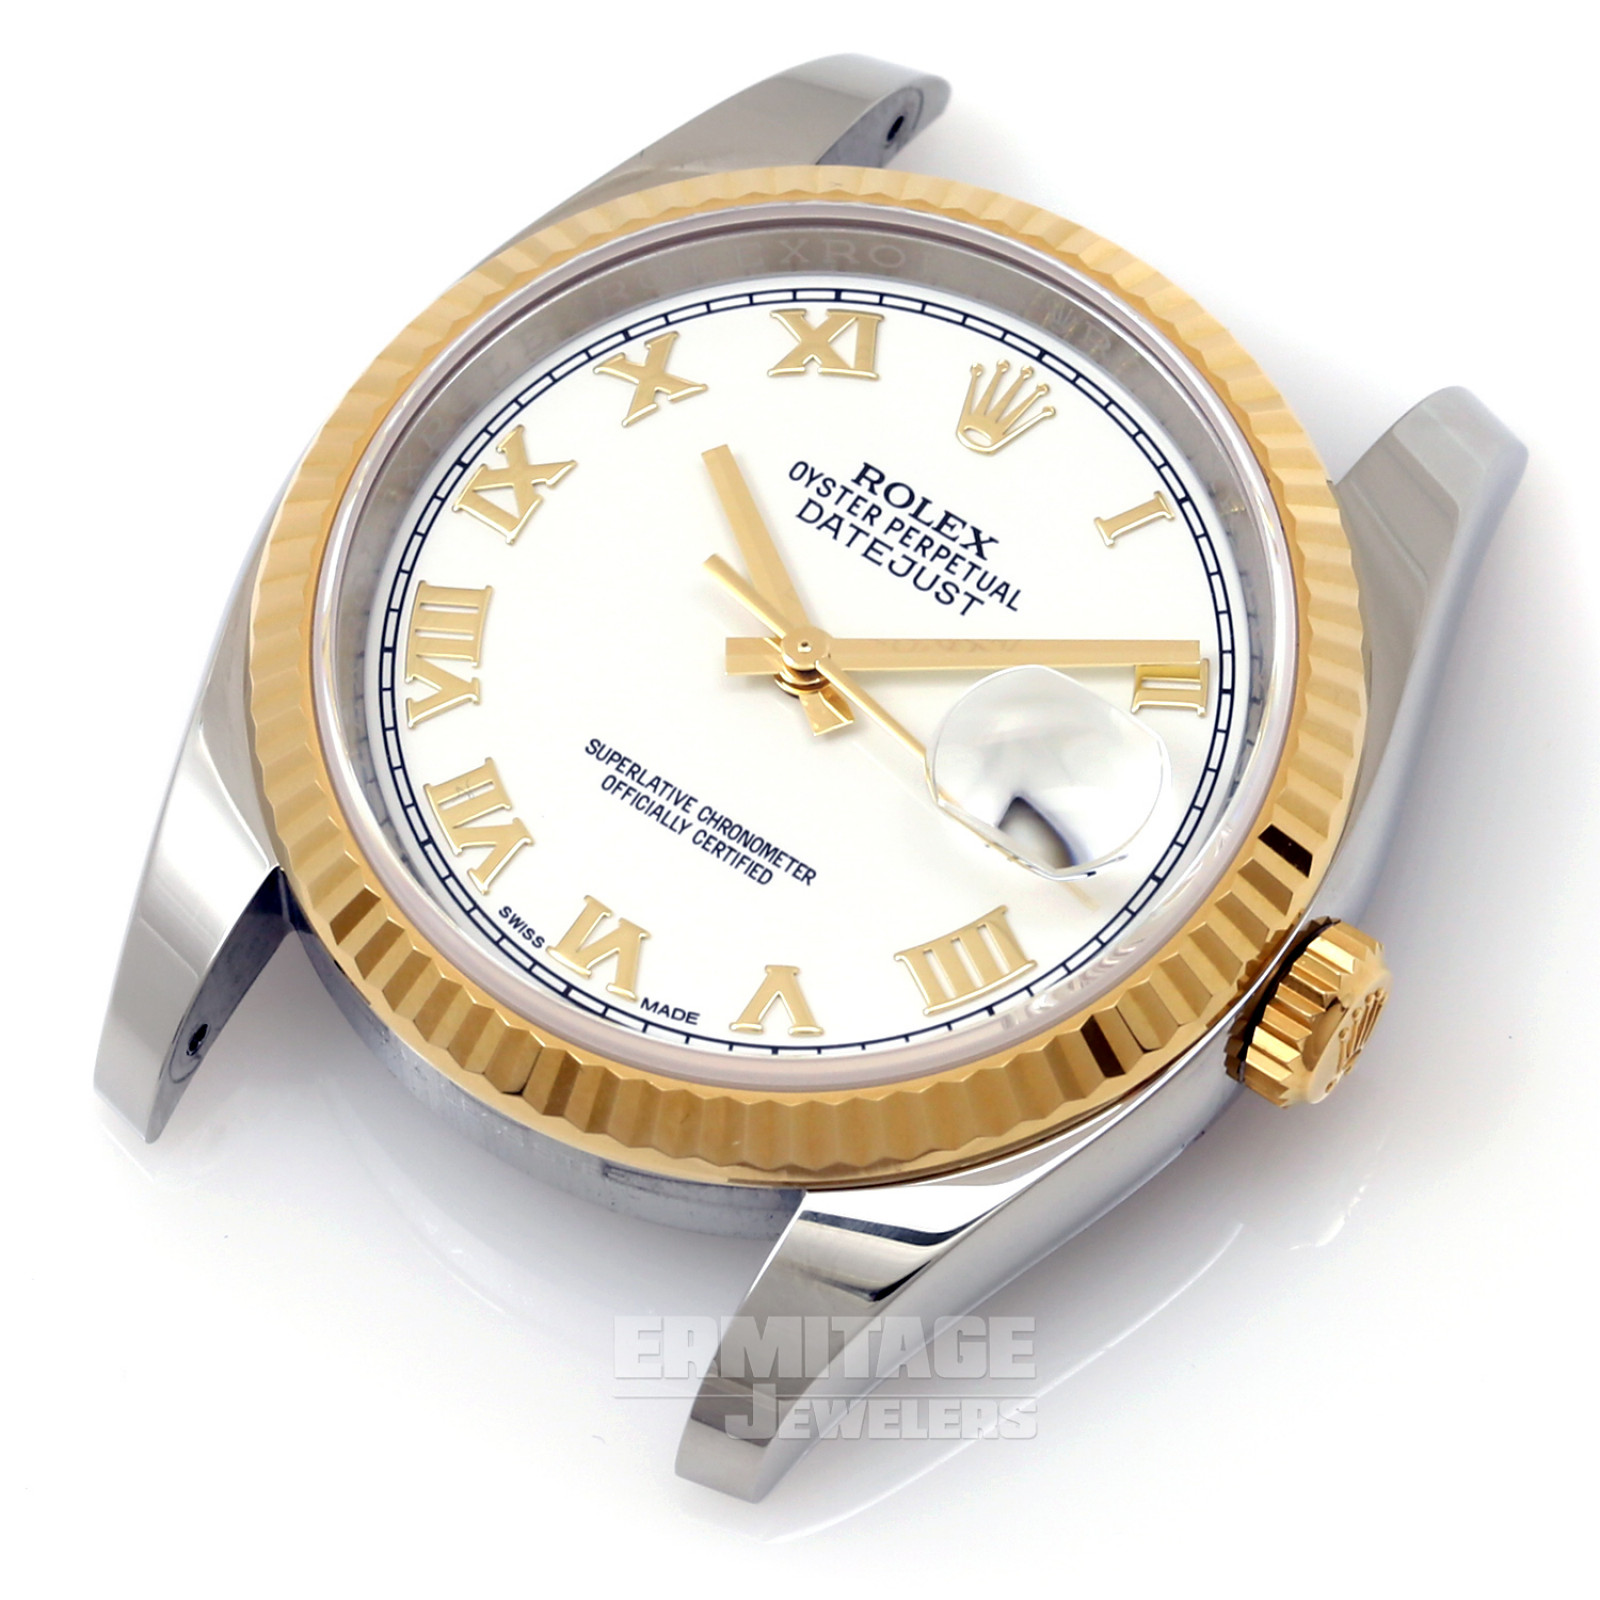 36 mm Rolex Datejust 116233 Gold & Steel on Oyster Pre-Owned